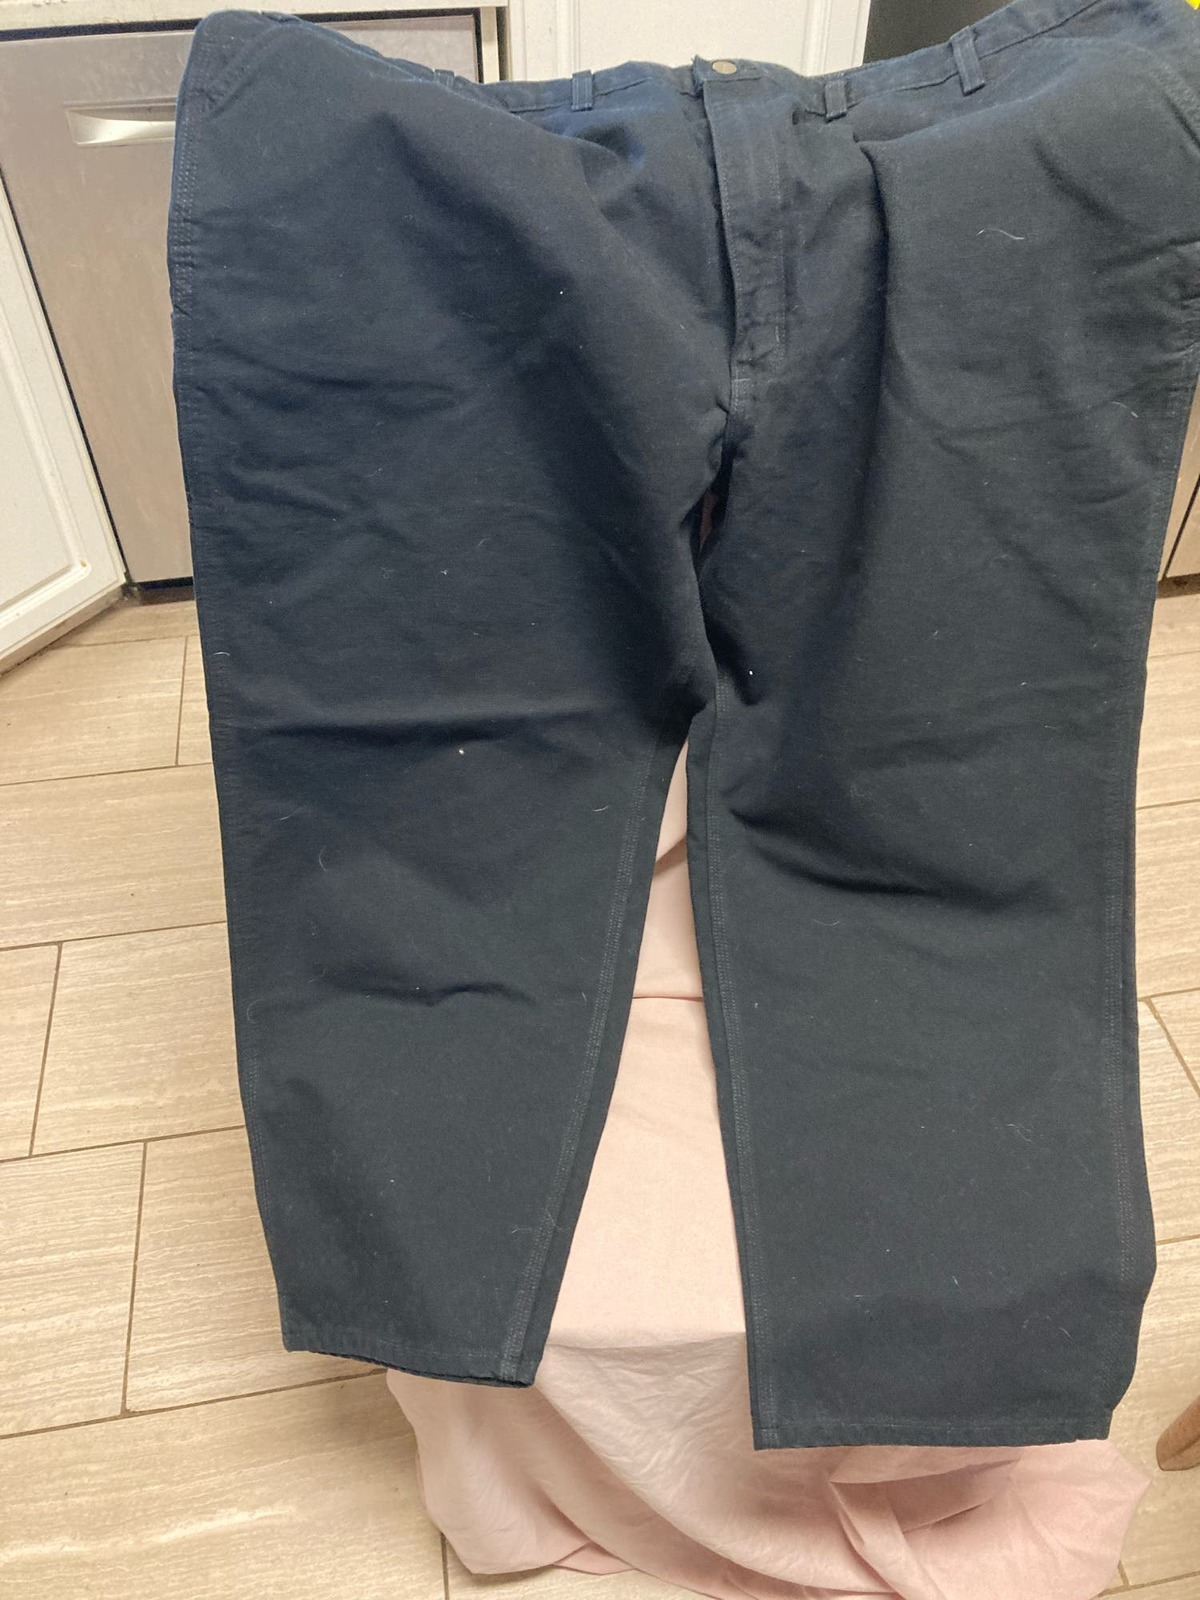 Primary image for Black Carhartt Pants Size 50x32 Extremally Good Condition 